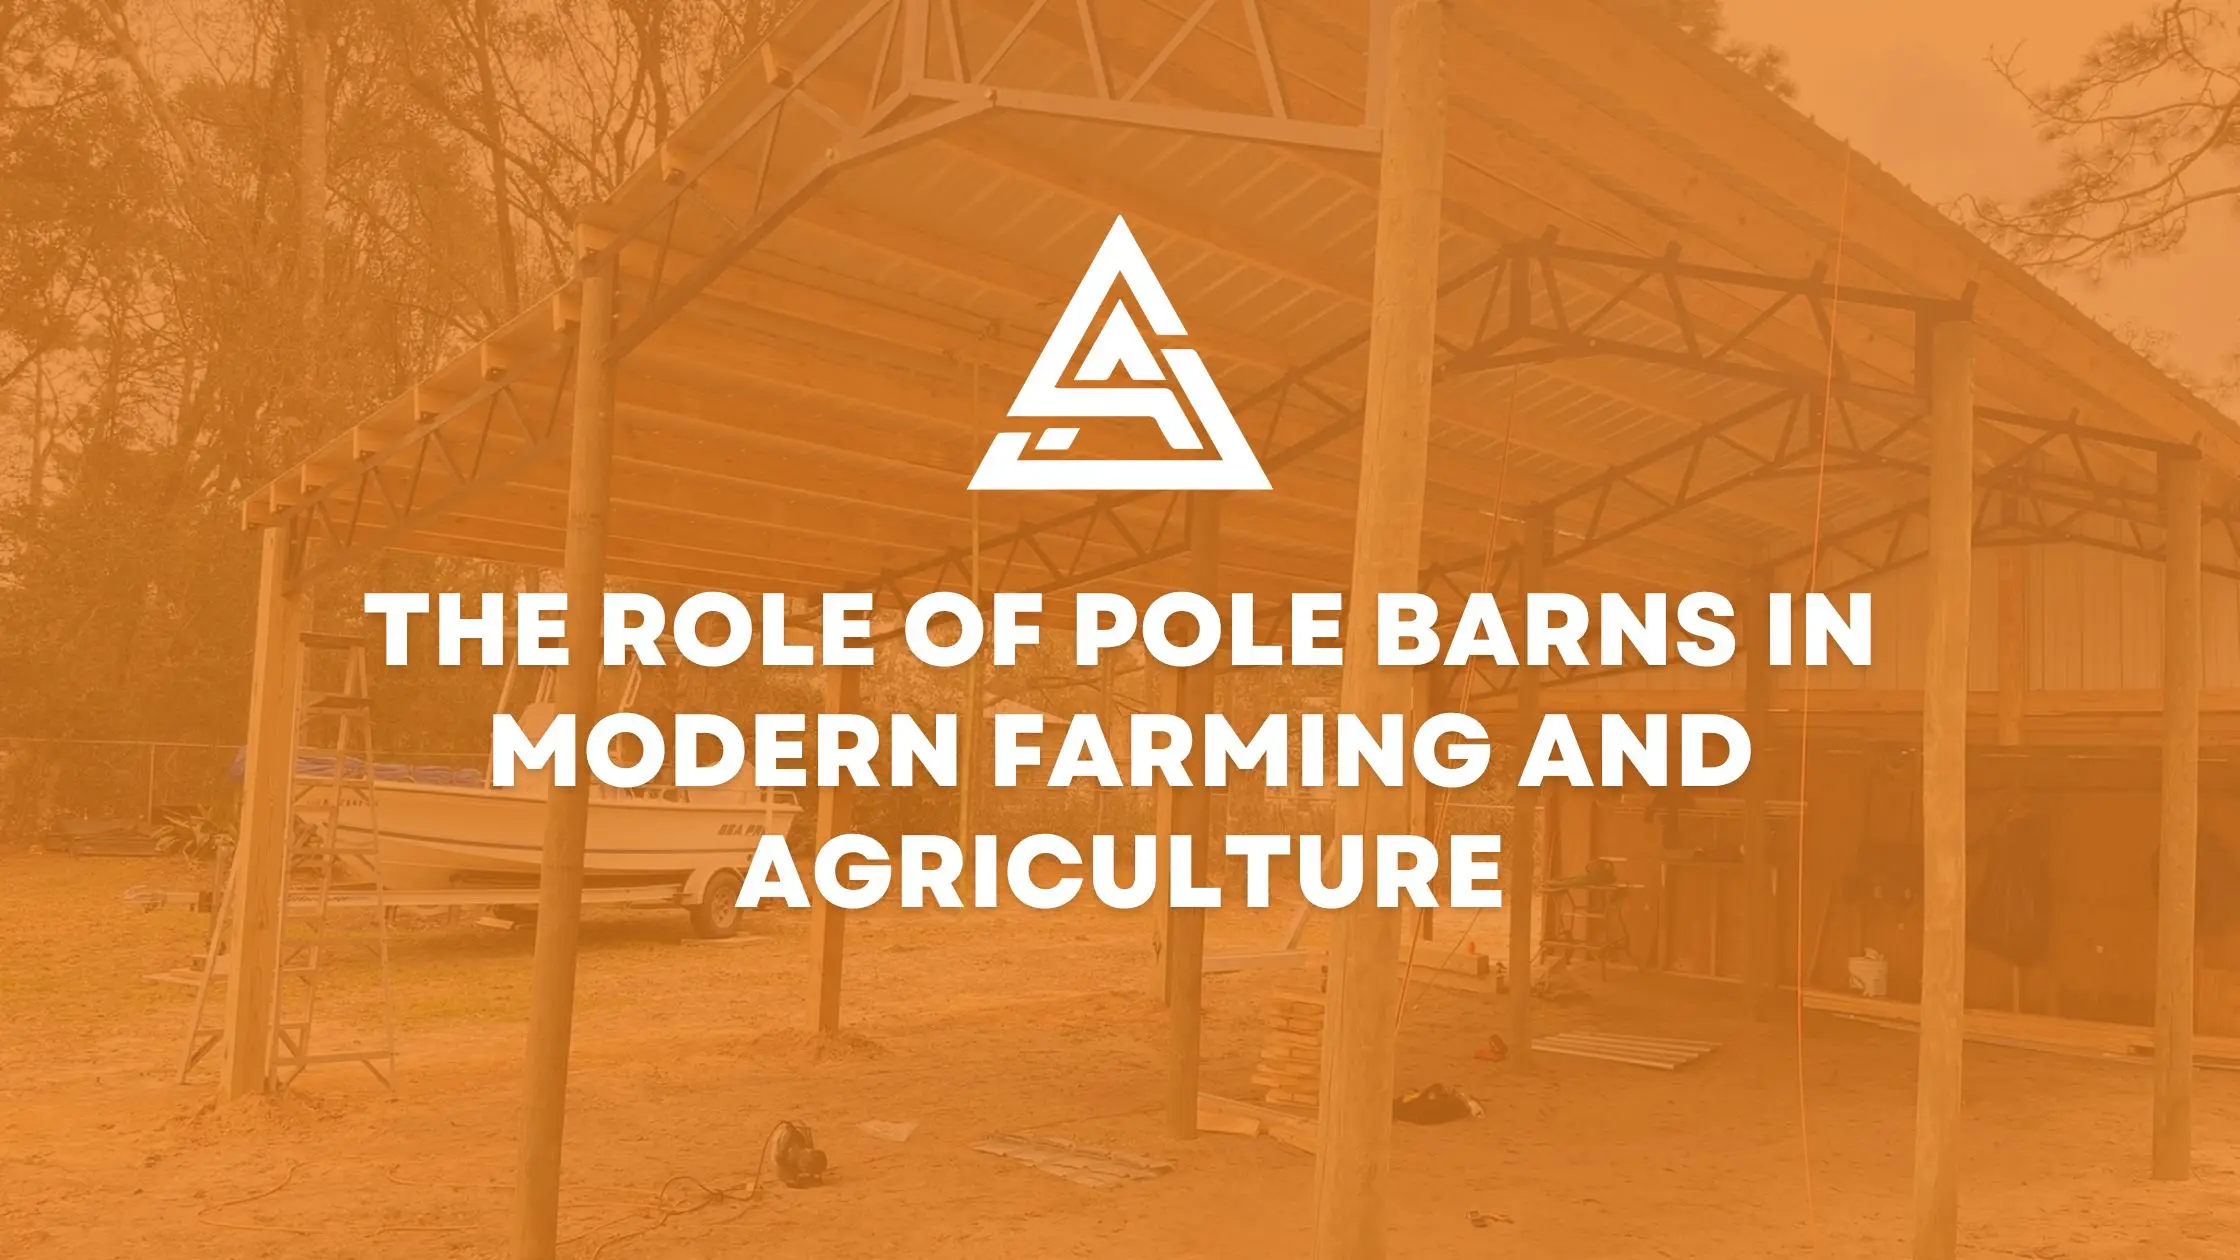 The Role of Pole Barns in Modern Farming and Agriculture